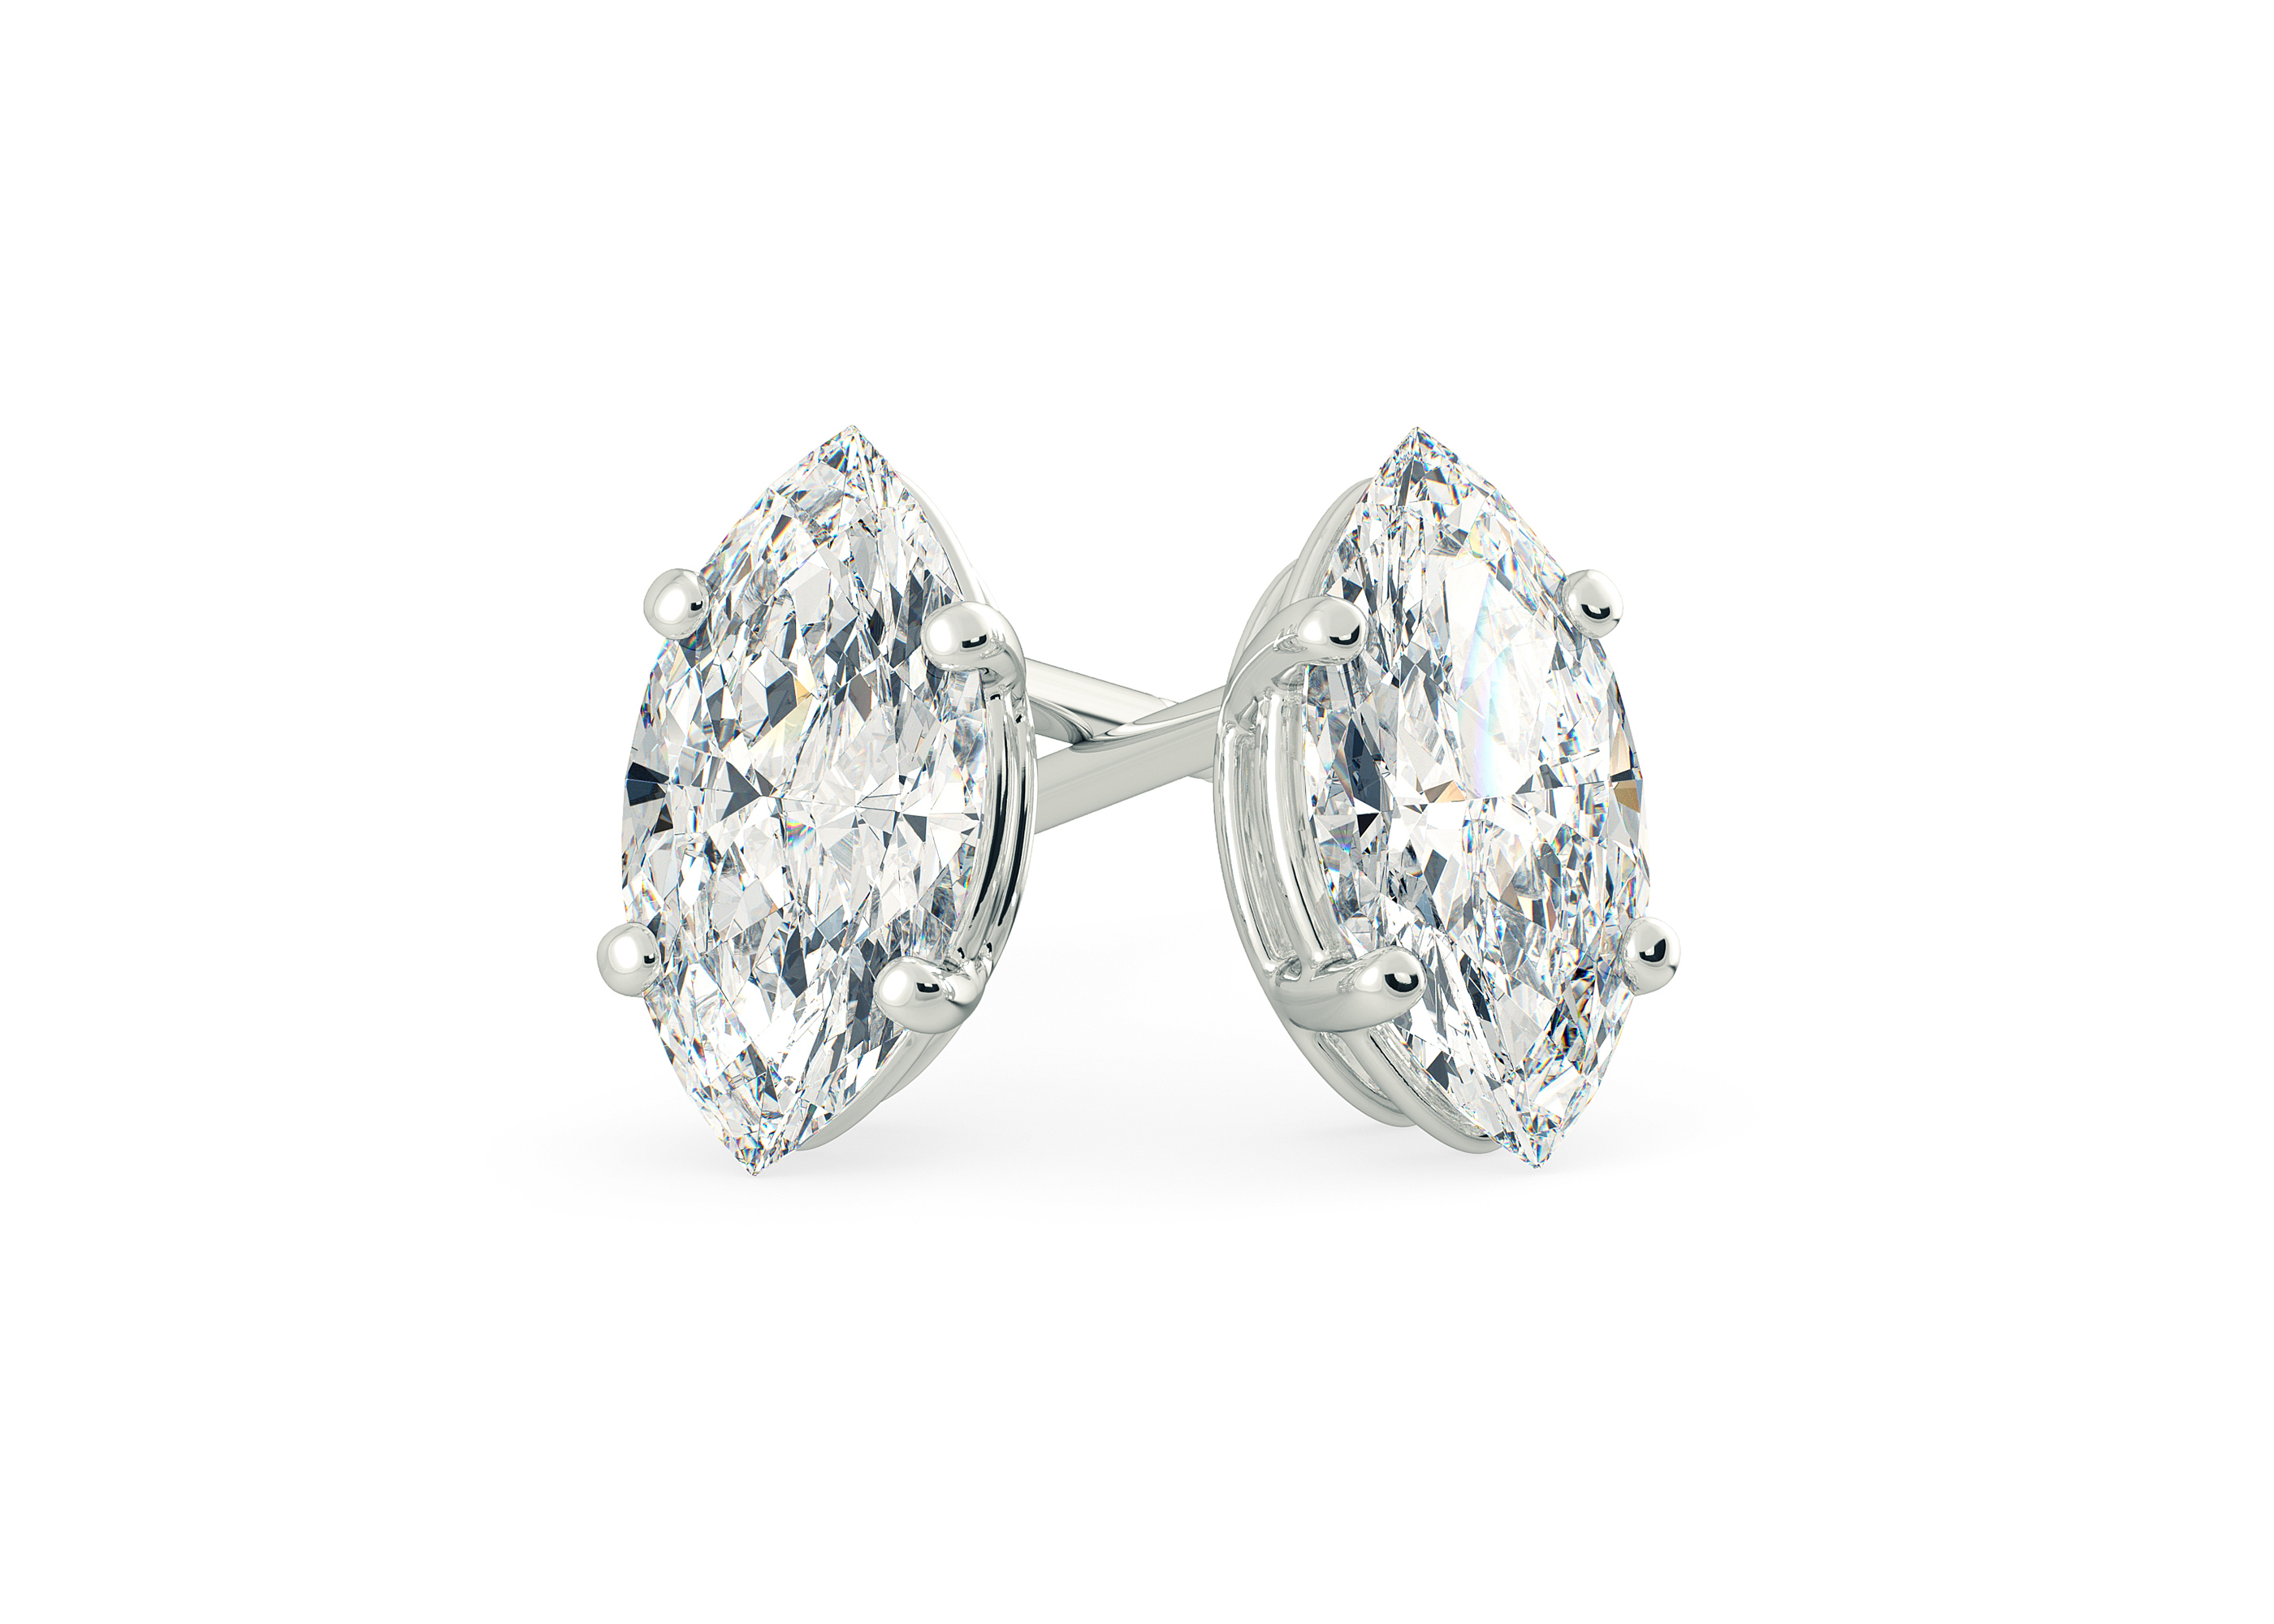 Two Carat Marquise Diamond Stud Earrings in 18K White Gold